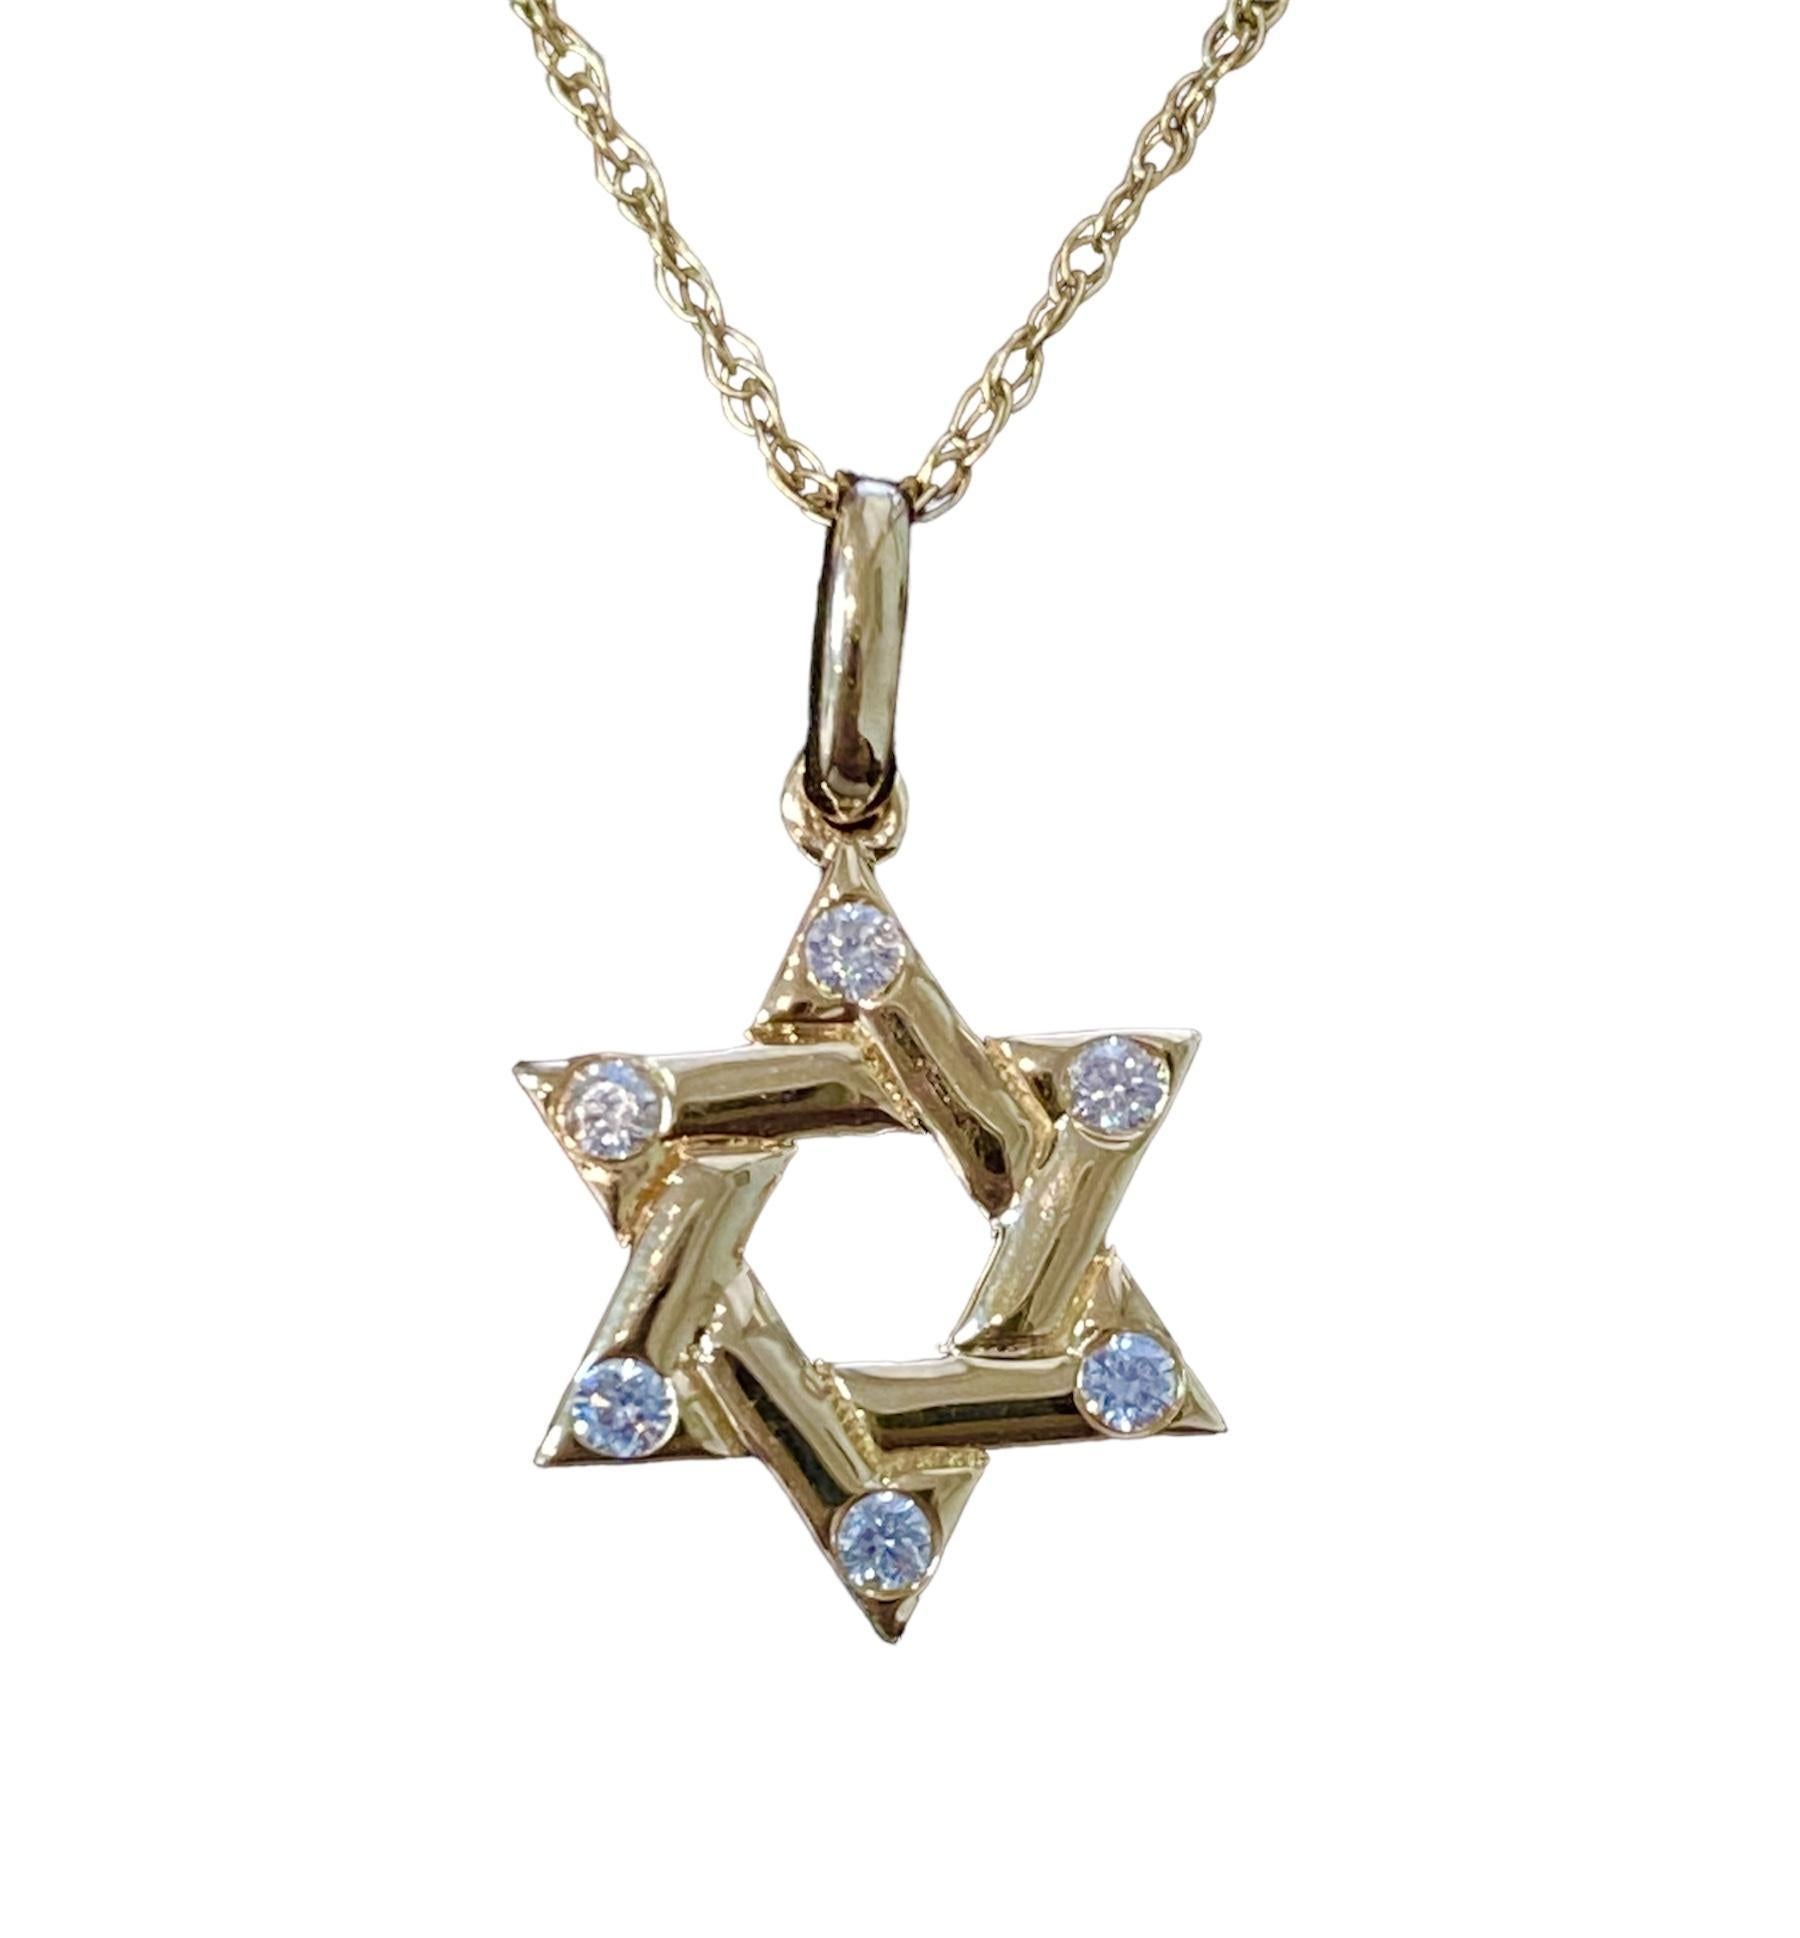 14K Gold Star of David Natural Diamond Necklace is a symbolic piece of jewelry that beautifully combines religious significance with timeless elegance.
Crafted from high-quality 14-karat gold
The pendant takes the form of the Star of David, a